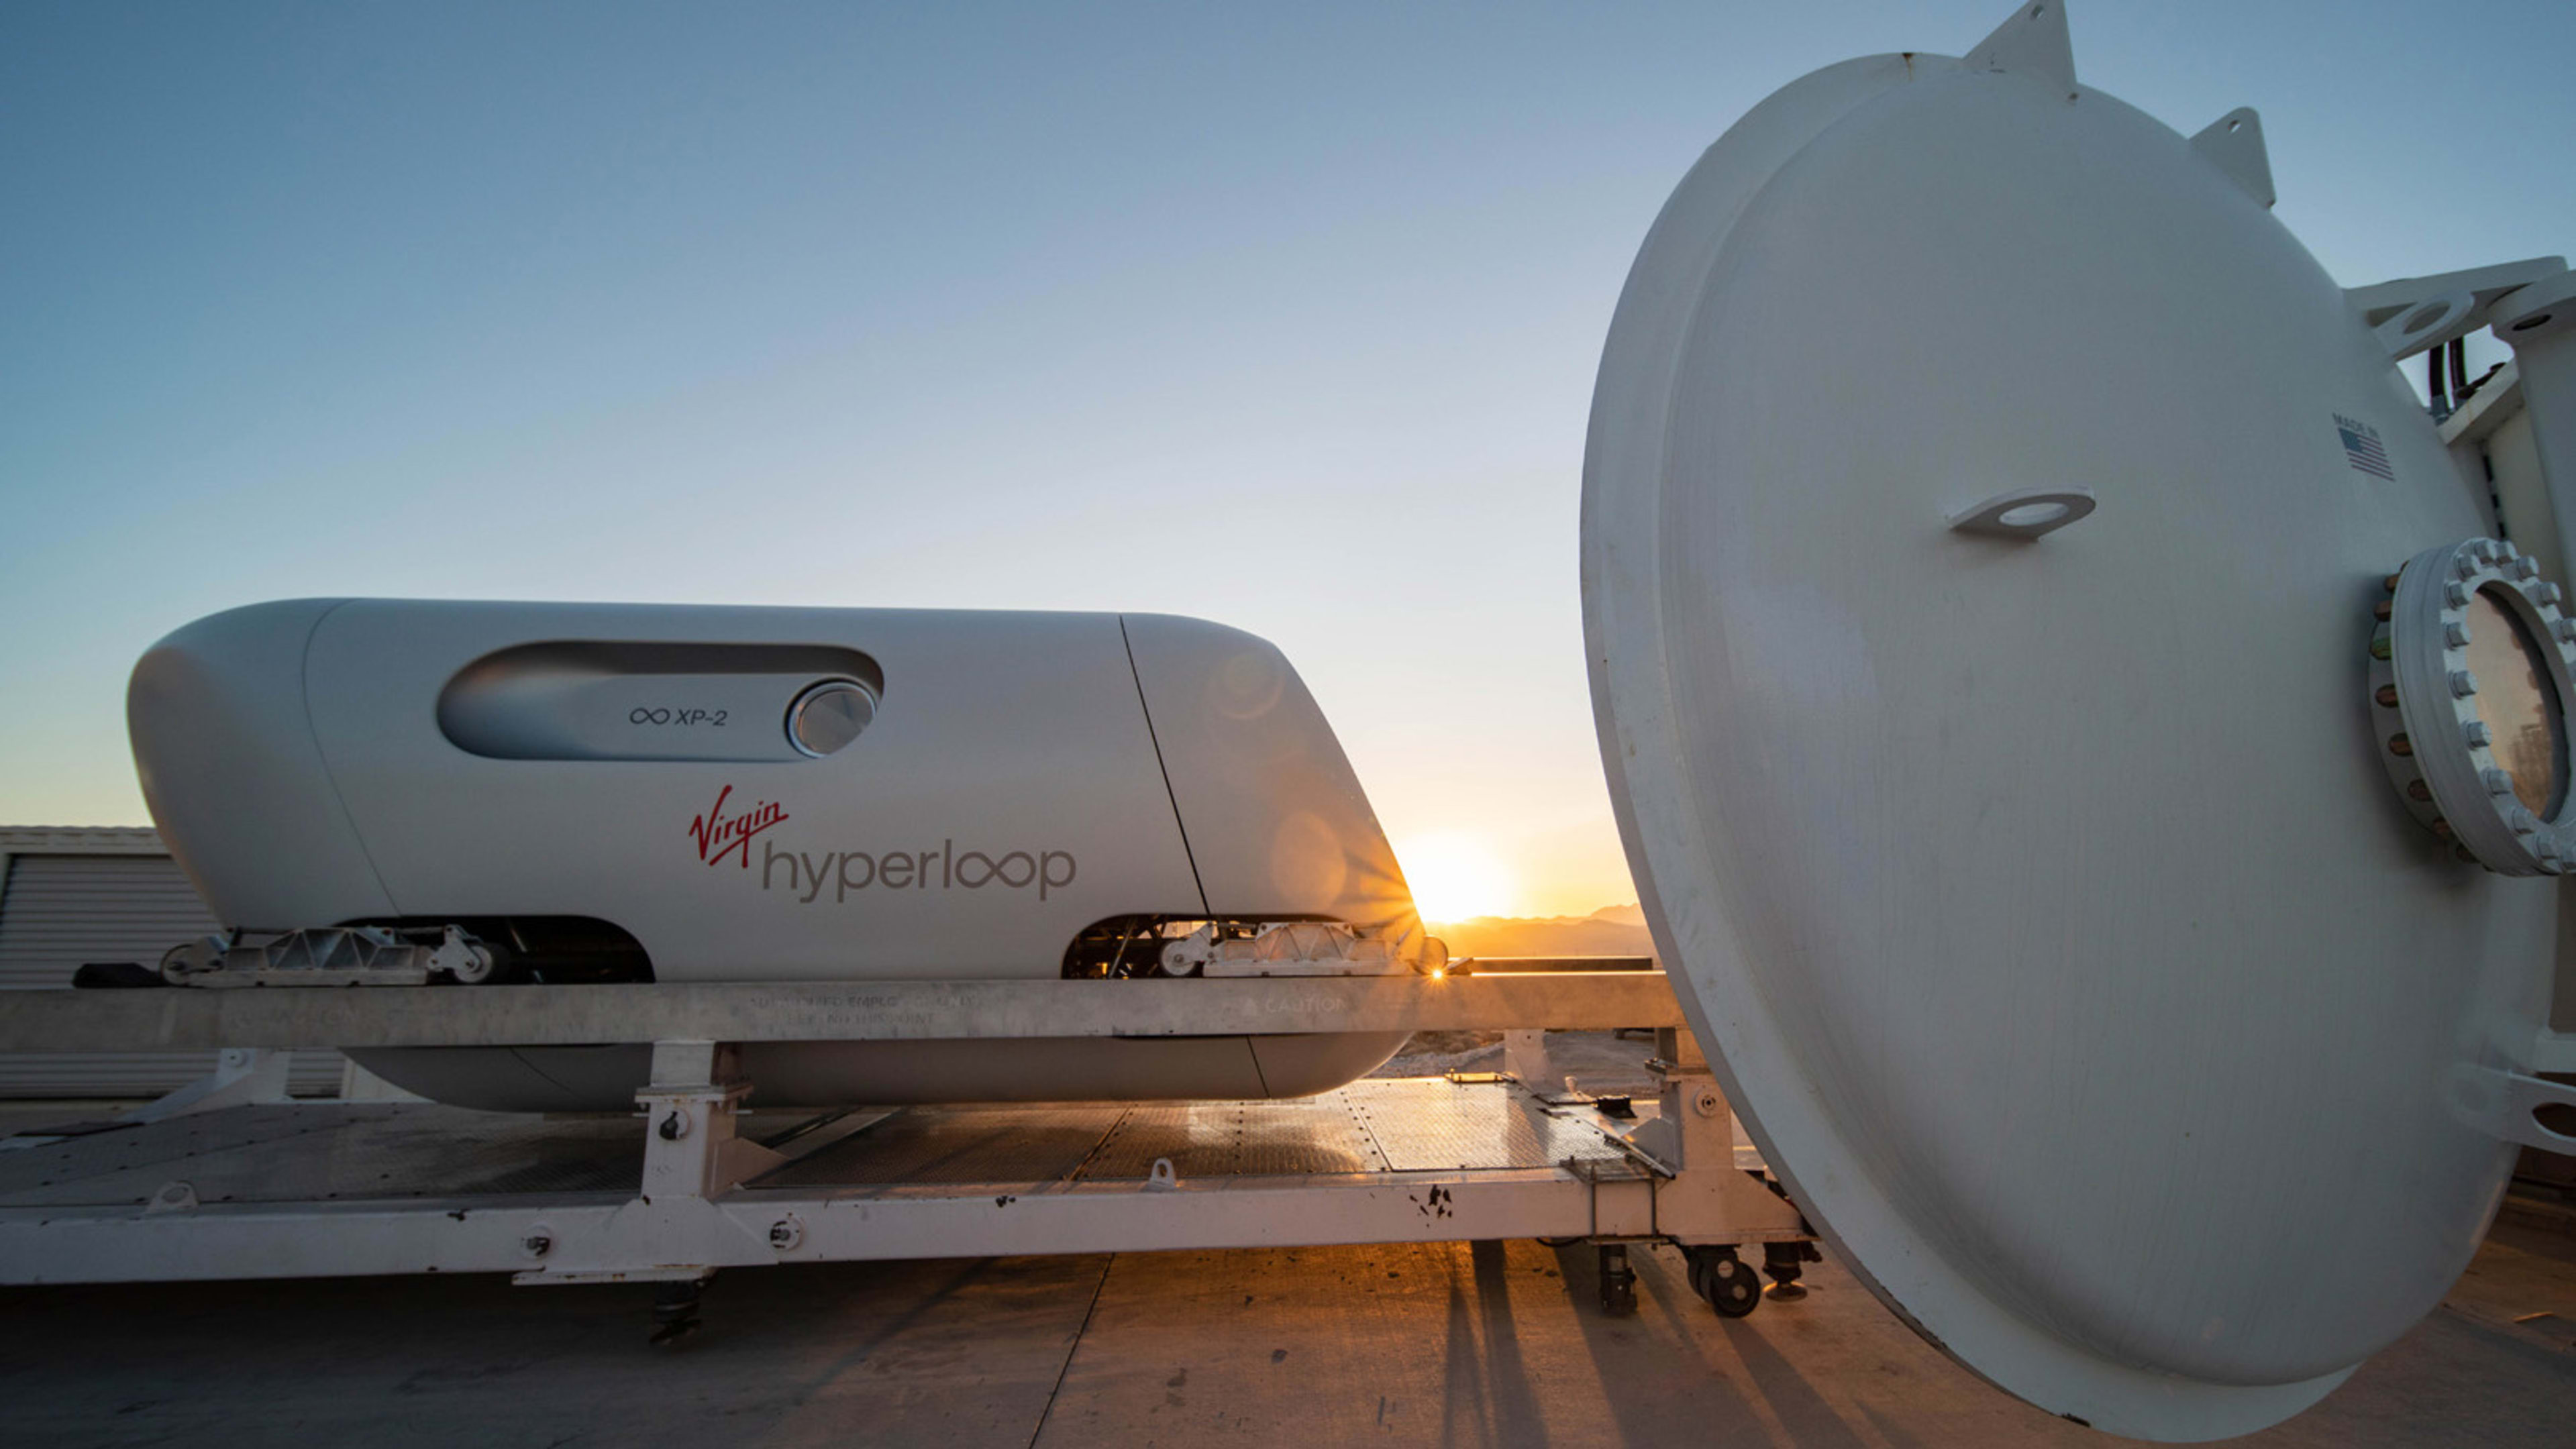 We still don’t know what the Hyperloop will feel like, but here’s how it will sound